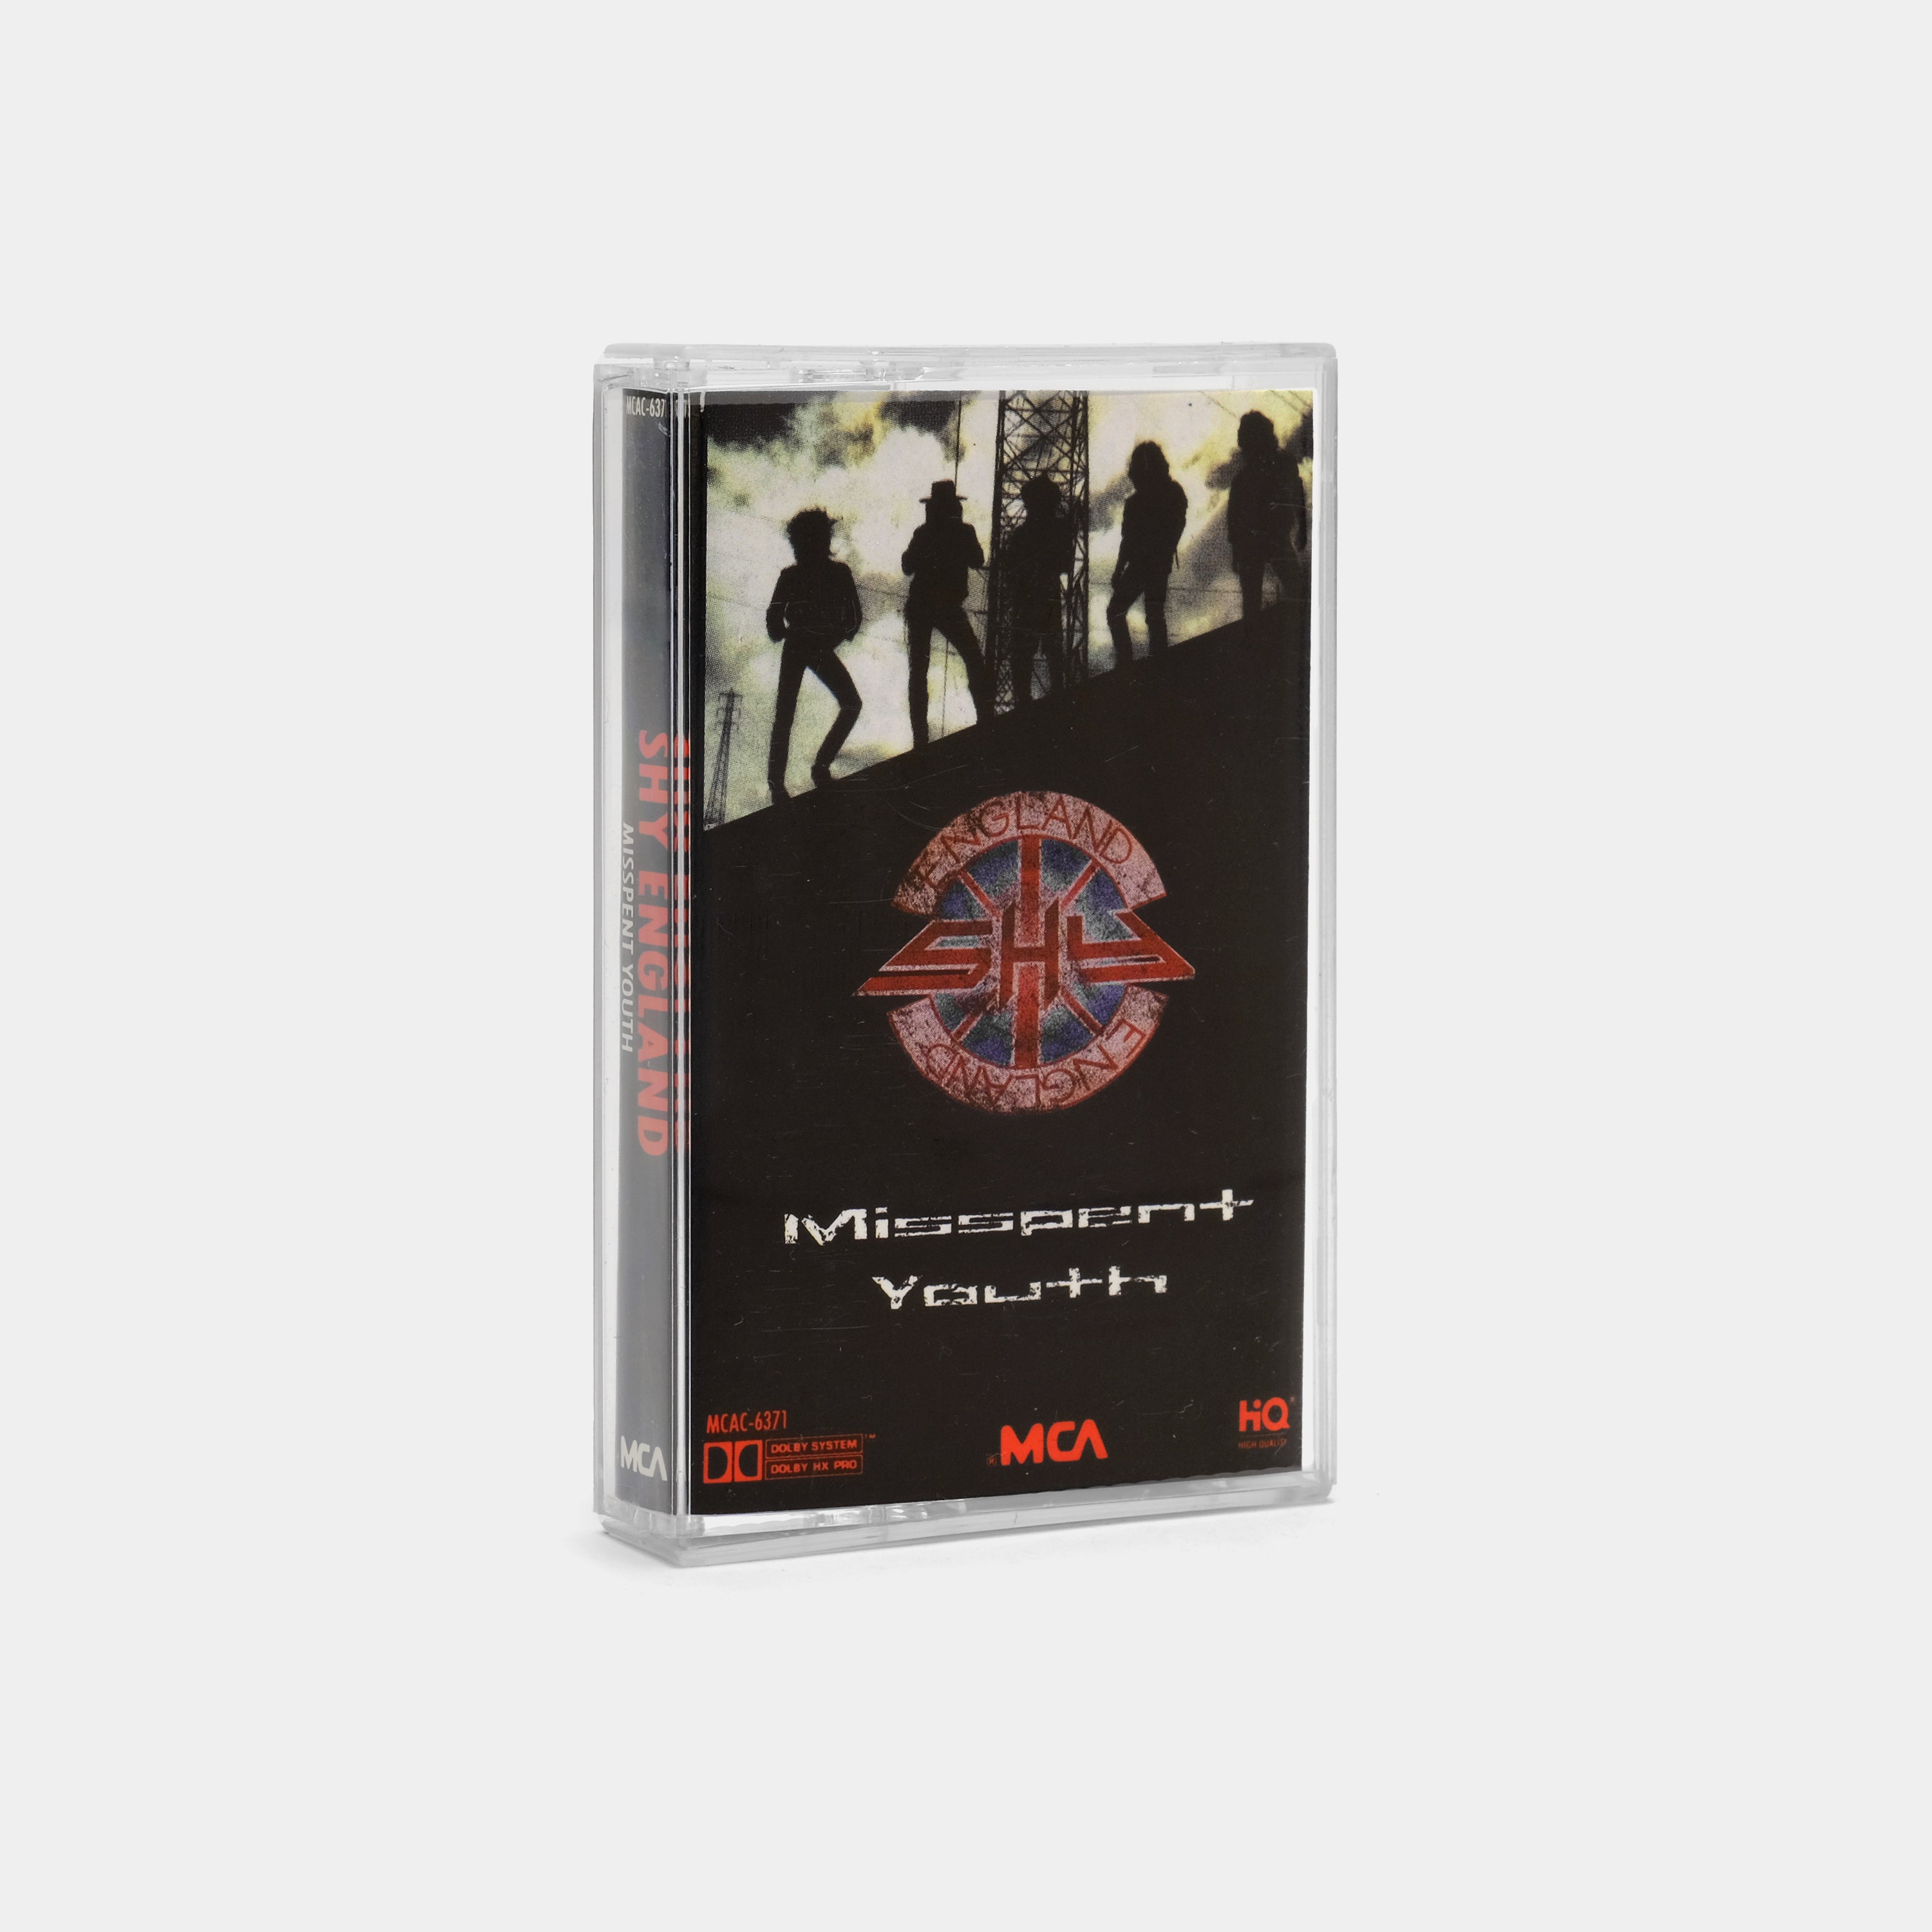 Shy - Misspent Youth Cassette Tape